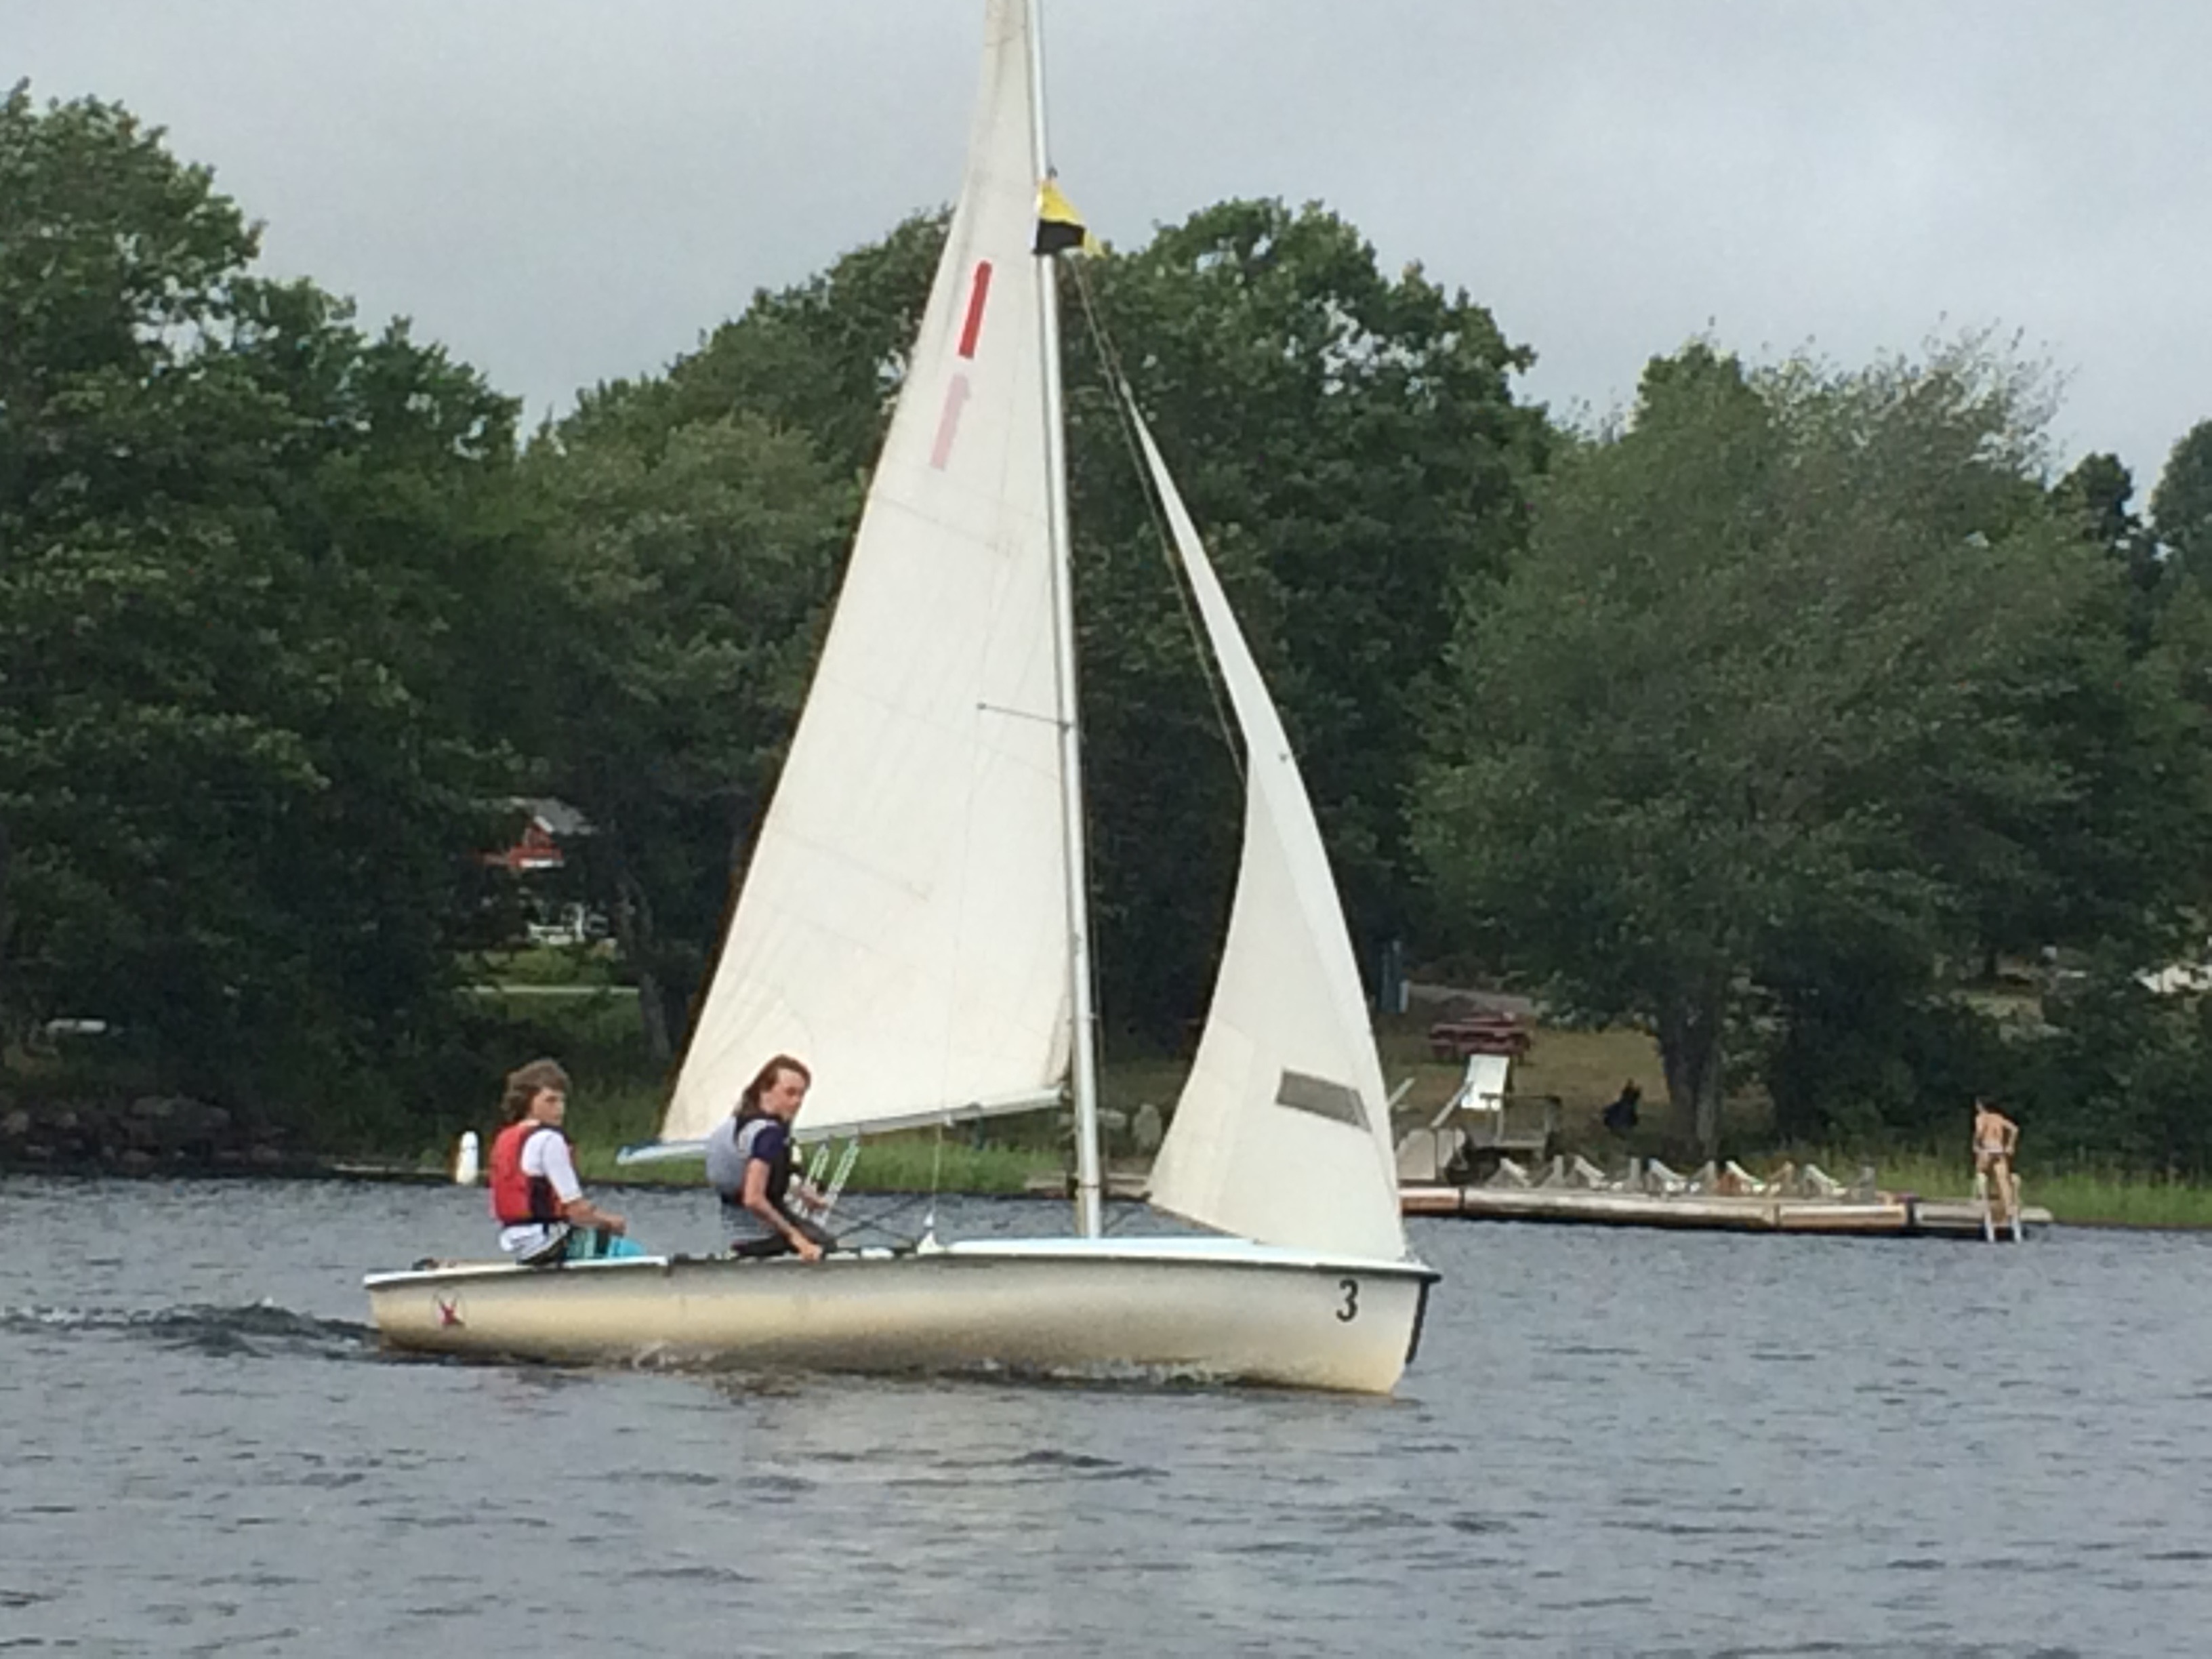 420 Sailing Dinghy - used in Beginner and Advanced Sailing Lessons